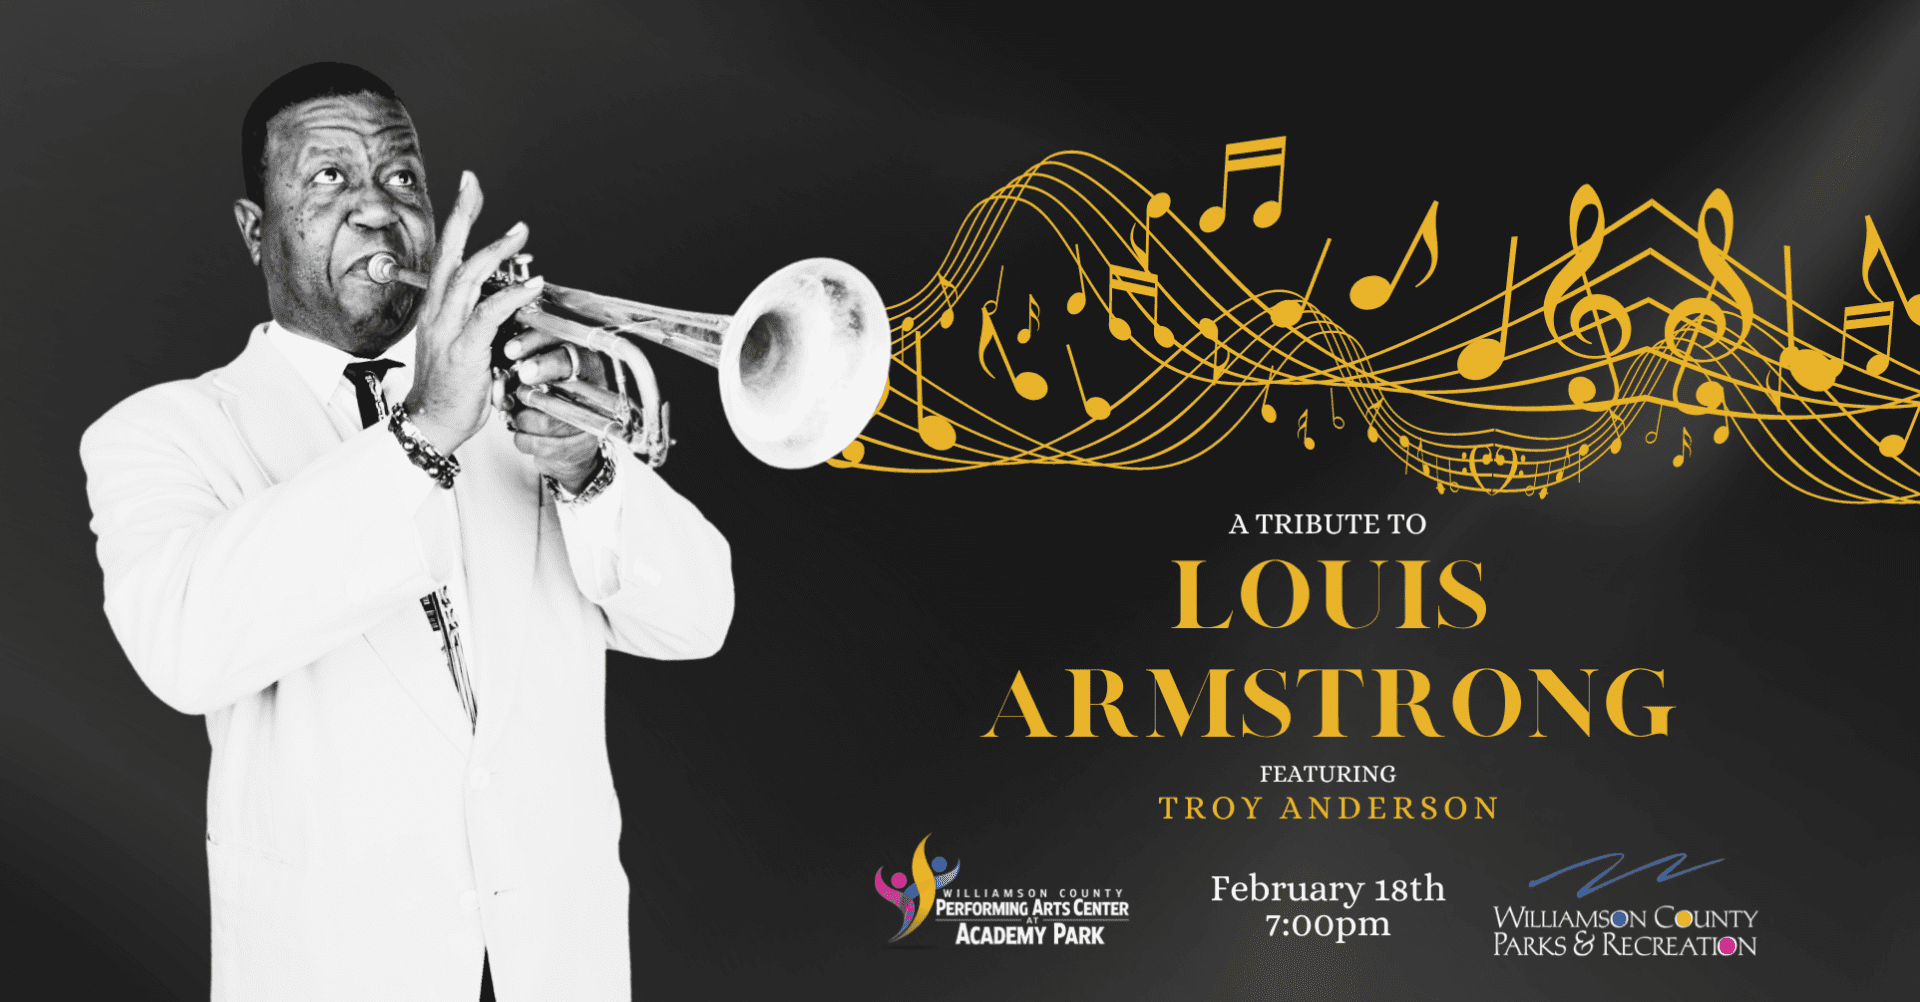 A Tribute to Louis Armstrong featuring Troy Anderson in Franklin, Tenn.